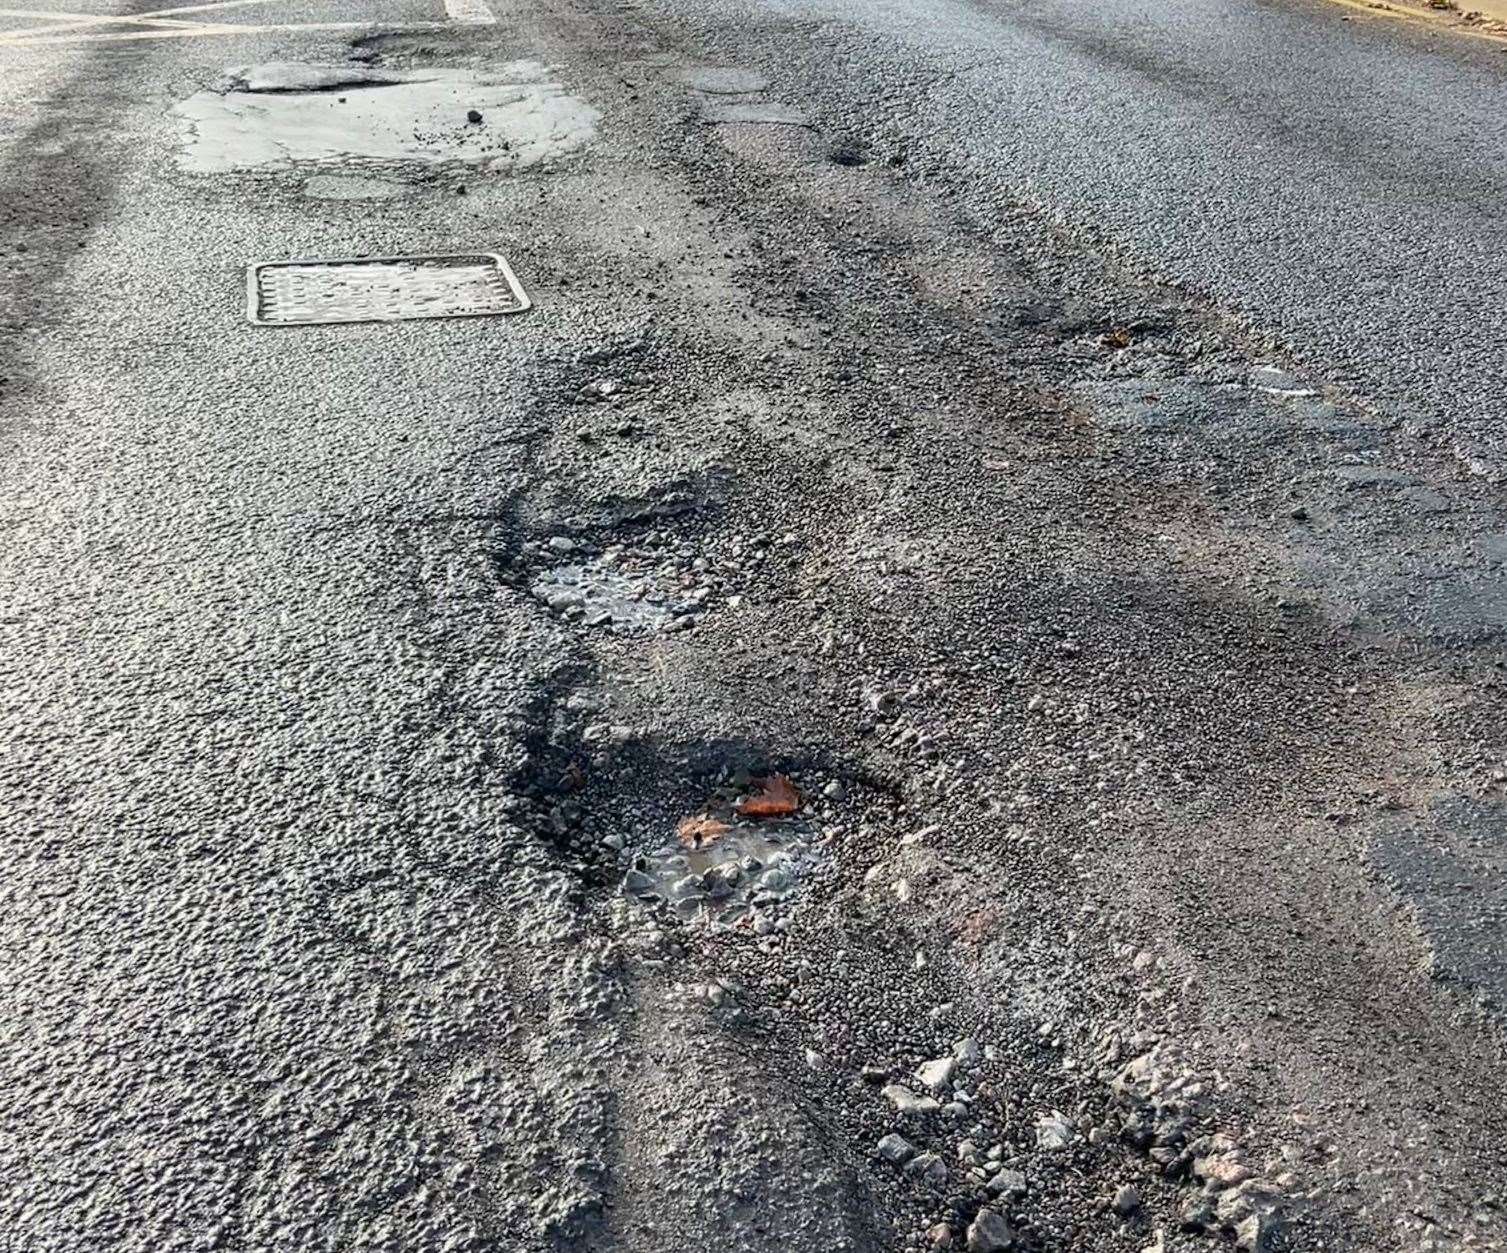 Mr Ward says something needs to be done to fix Tenterden's potholes